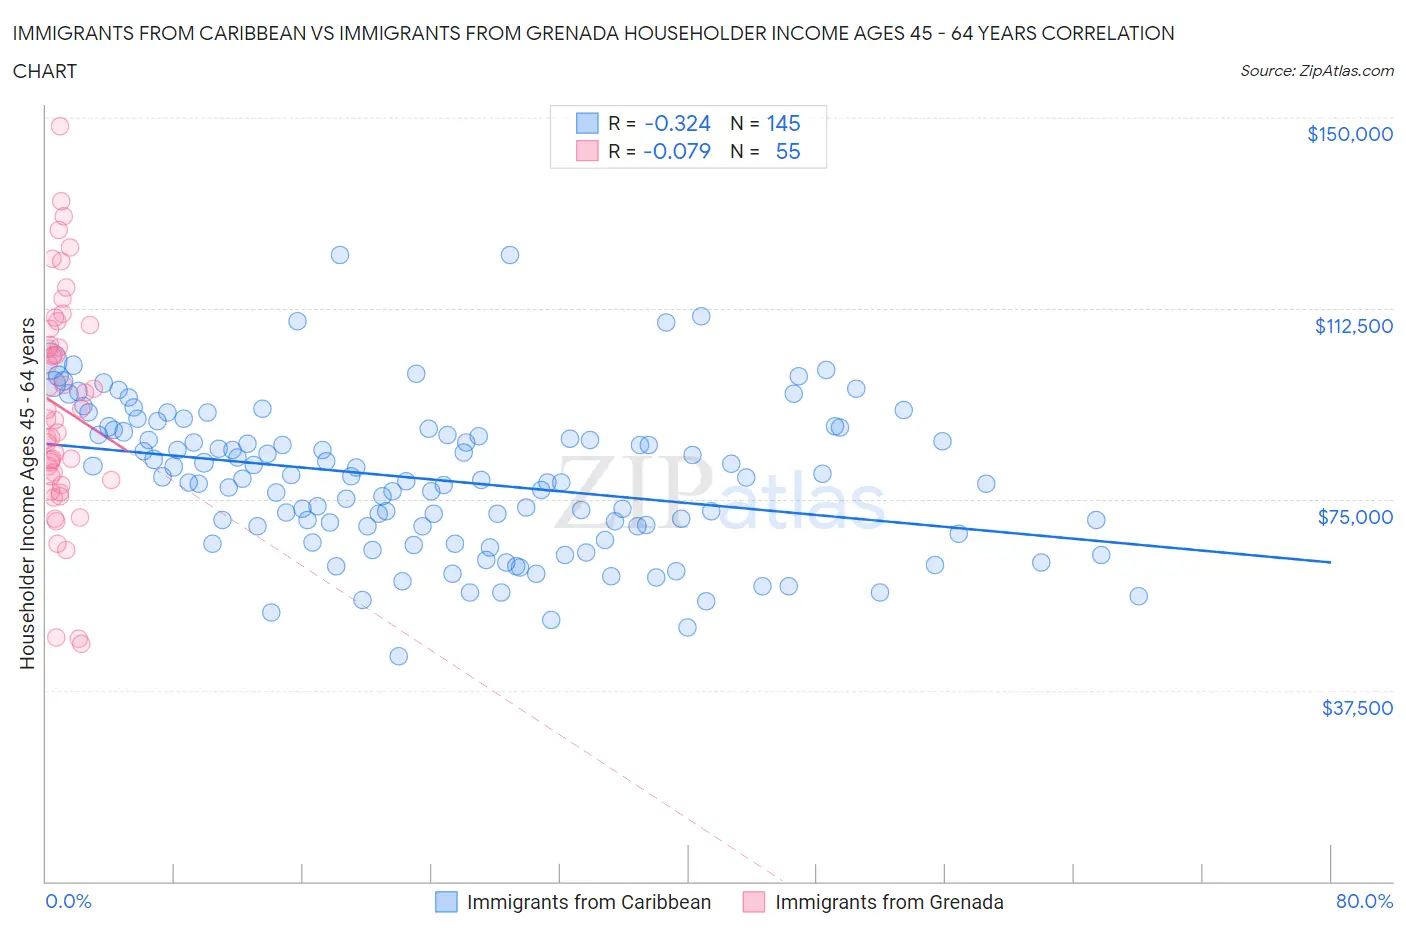 Immigrants from Caribbean vs Immigrants from Grenada Householder Income Ages 45 - 64 years